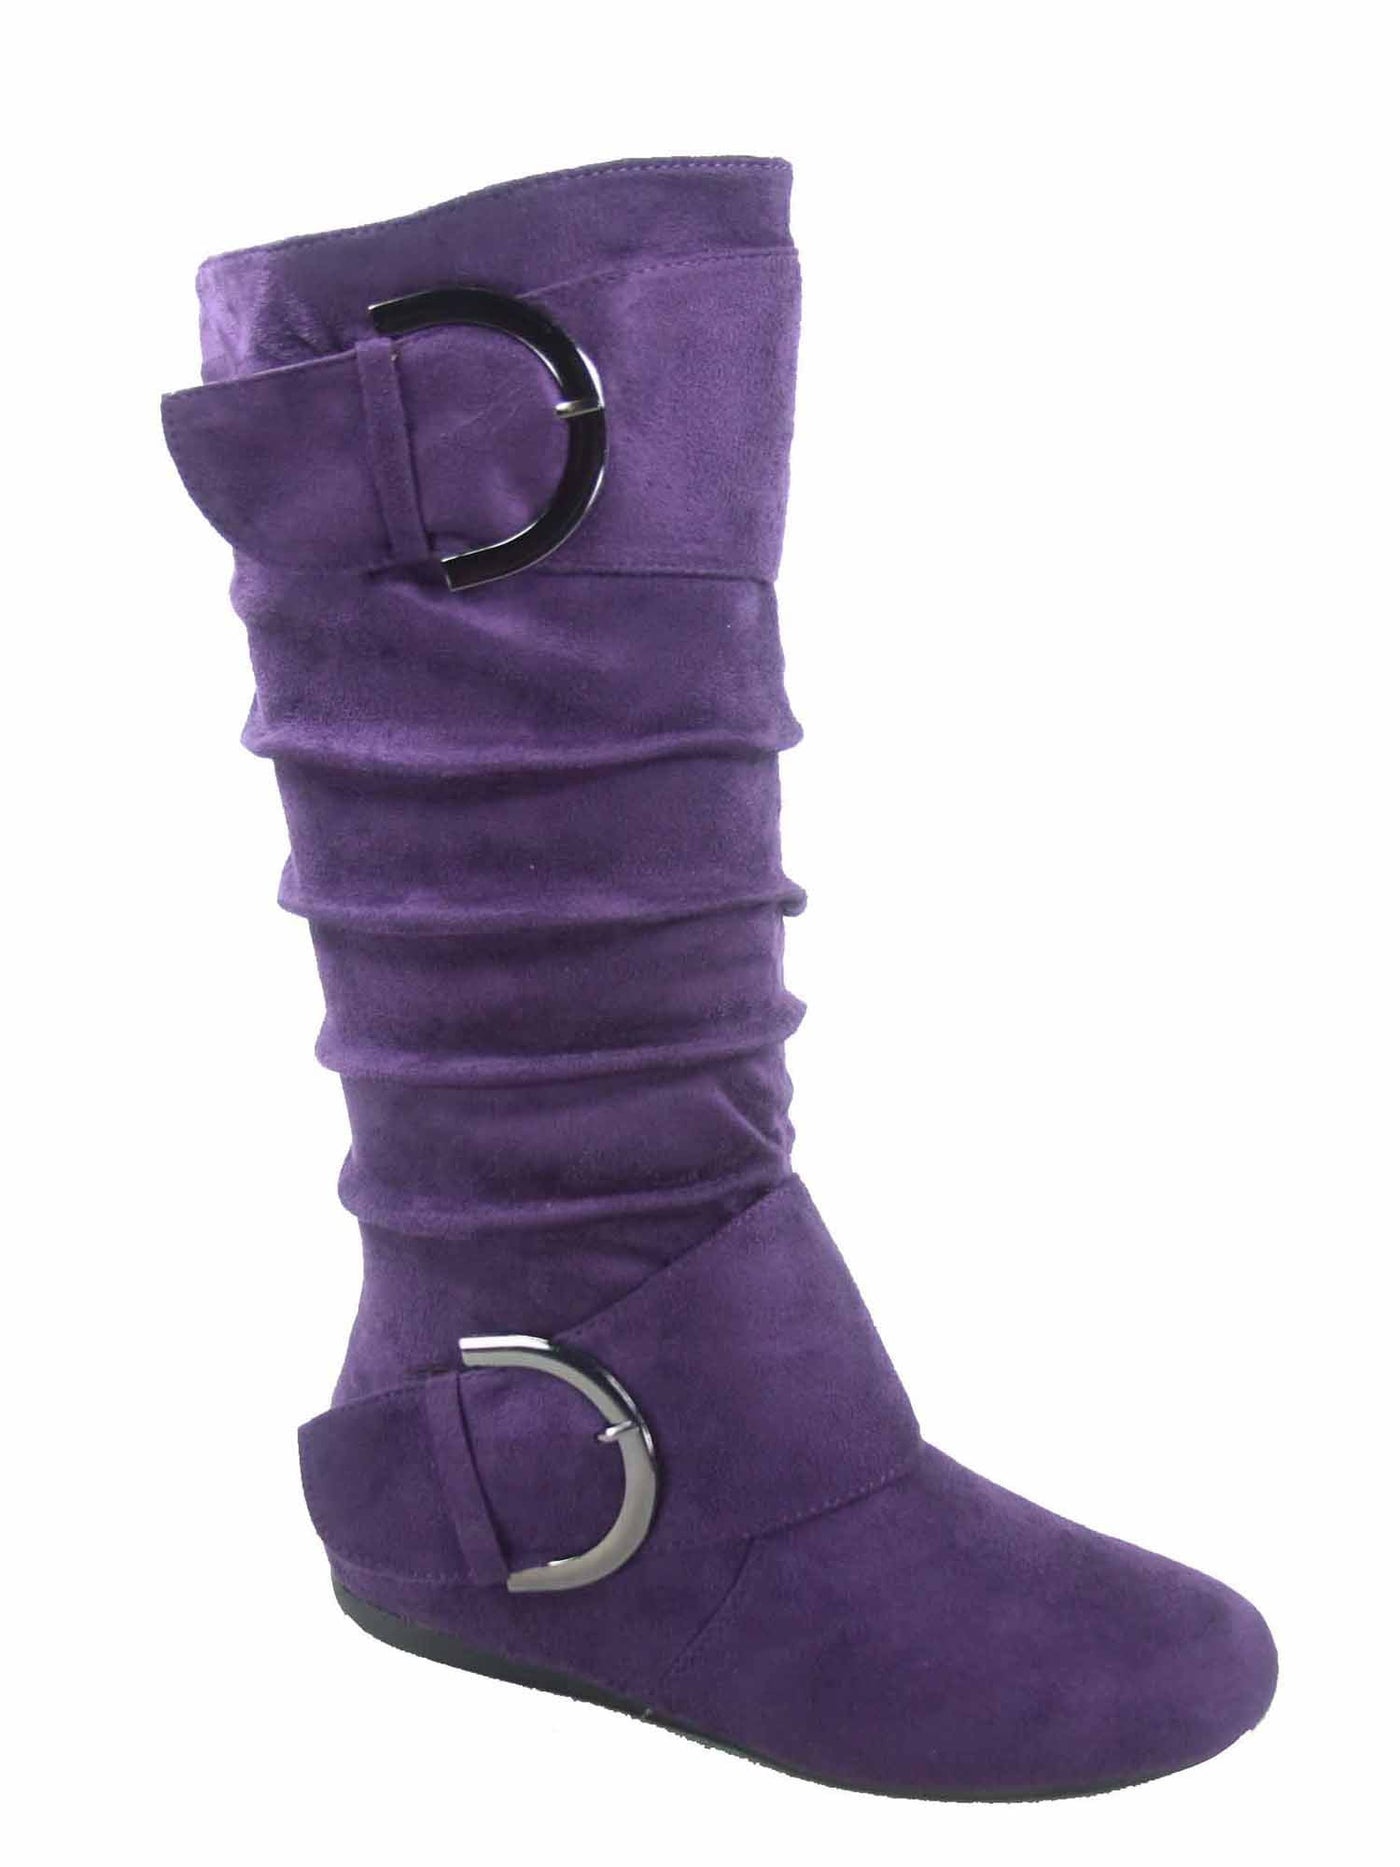 TOP MODA Womens Purple Ruched Buckle Accent Bank-81 Round Toe Zip-Up Slouch Boot 10